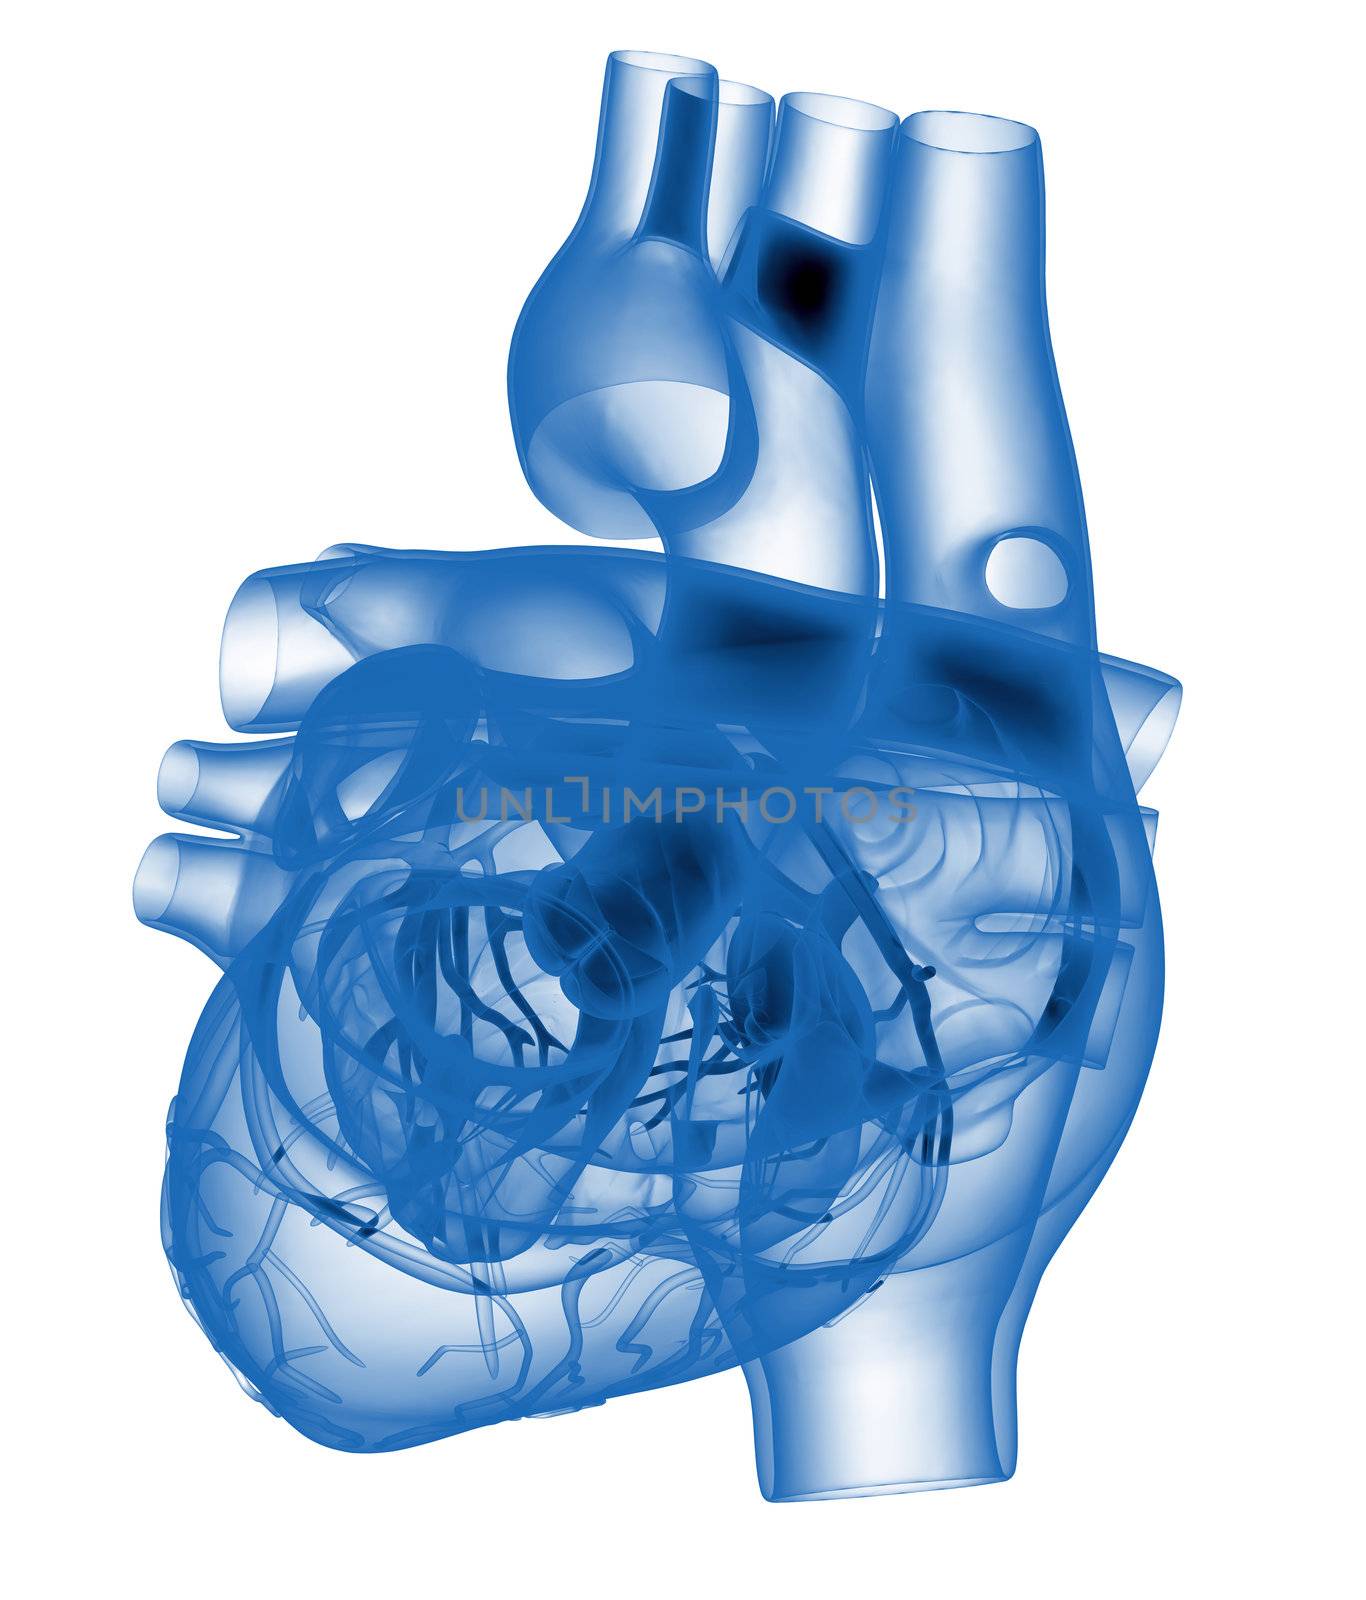 Model of artificial human heart - x-rayed